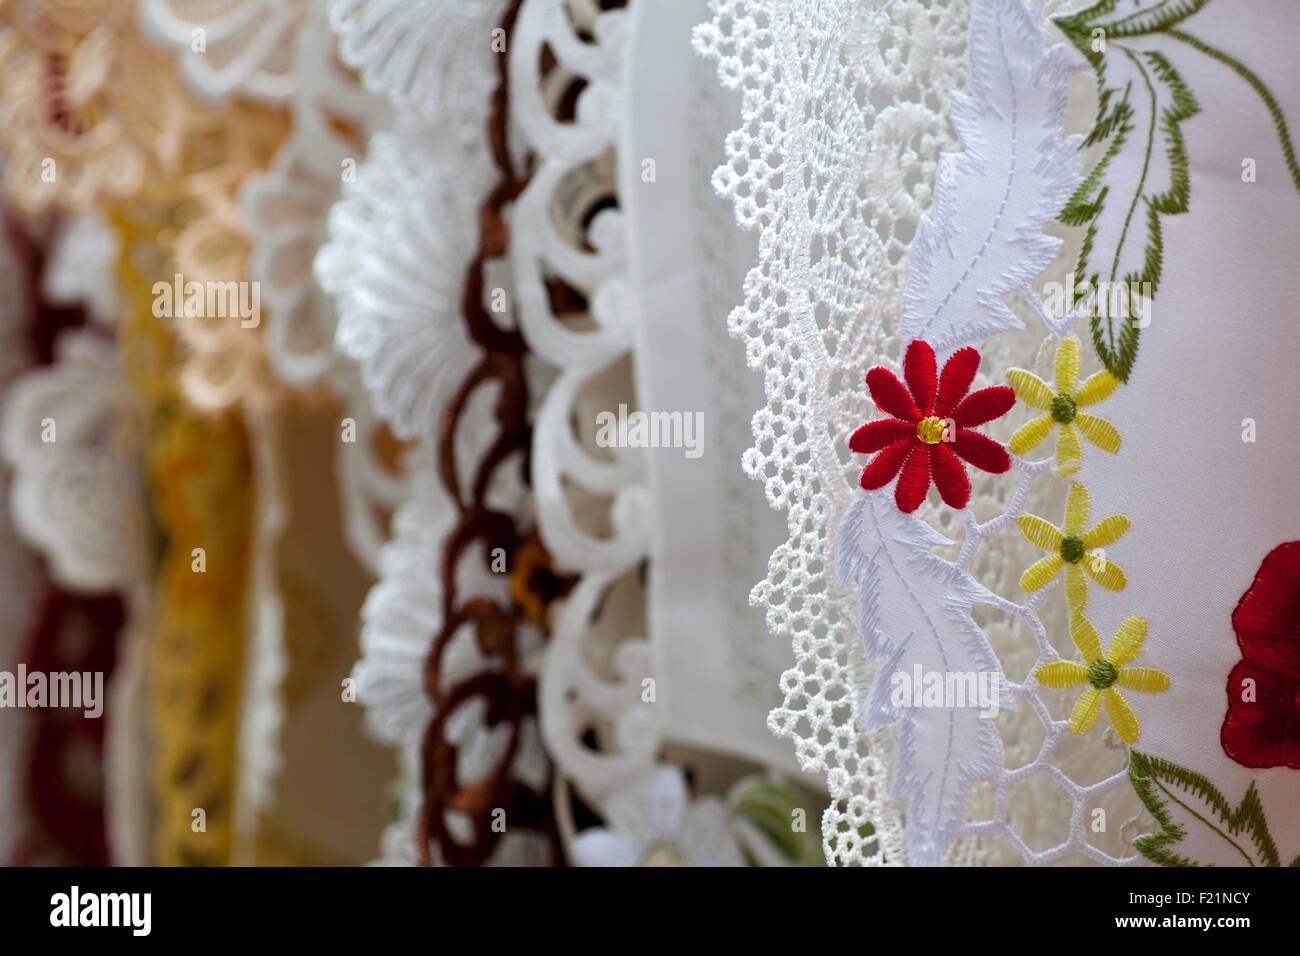 Fabric with Embroidery and lace Stock Photo